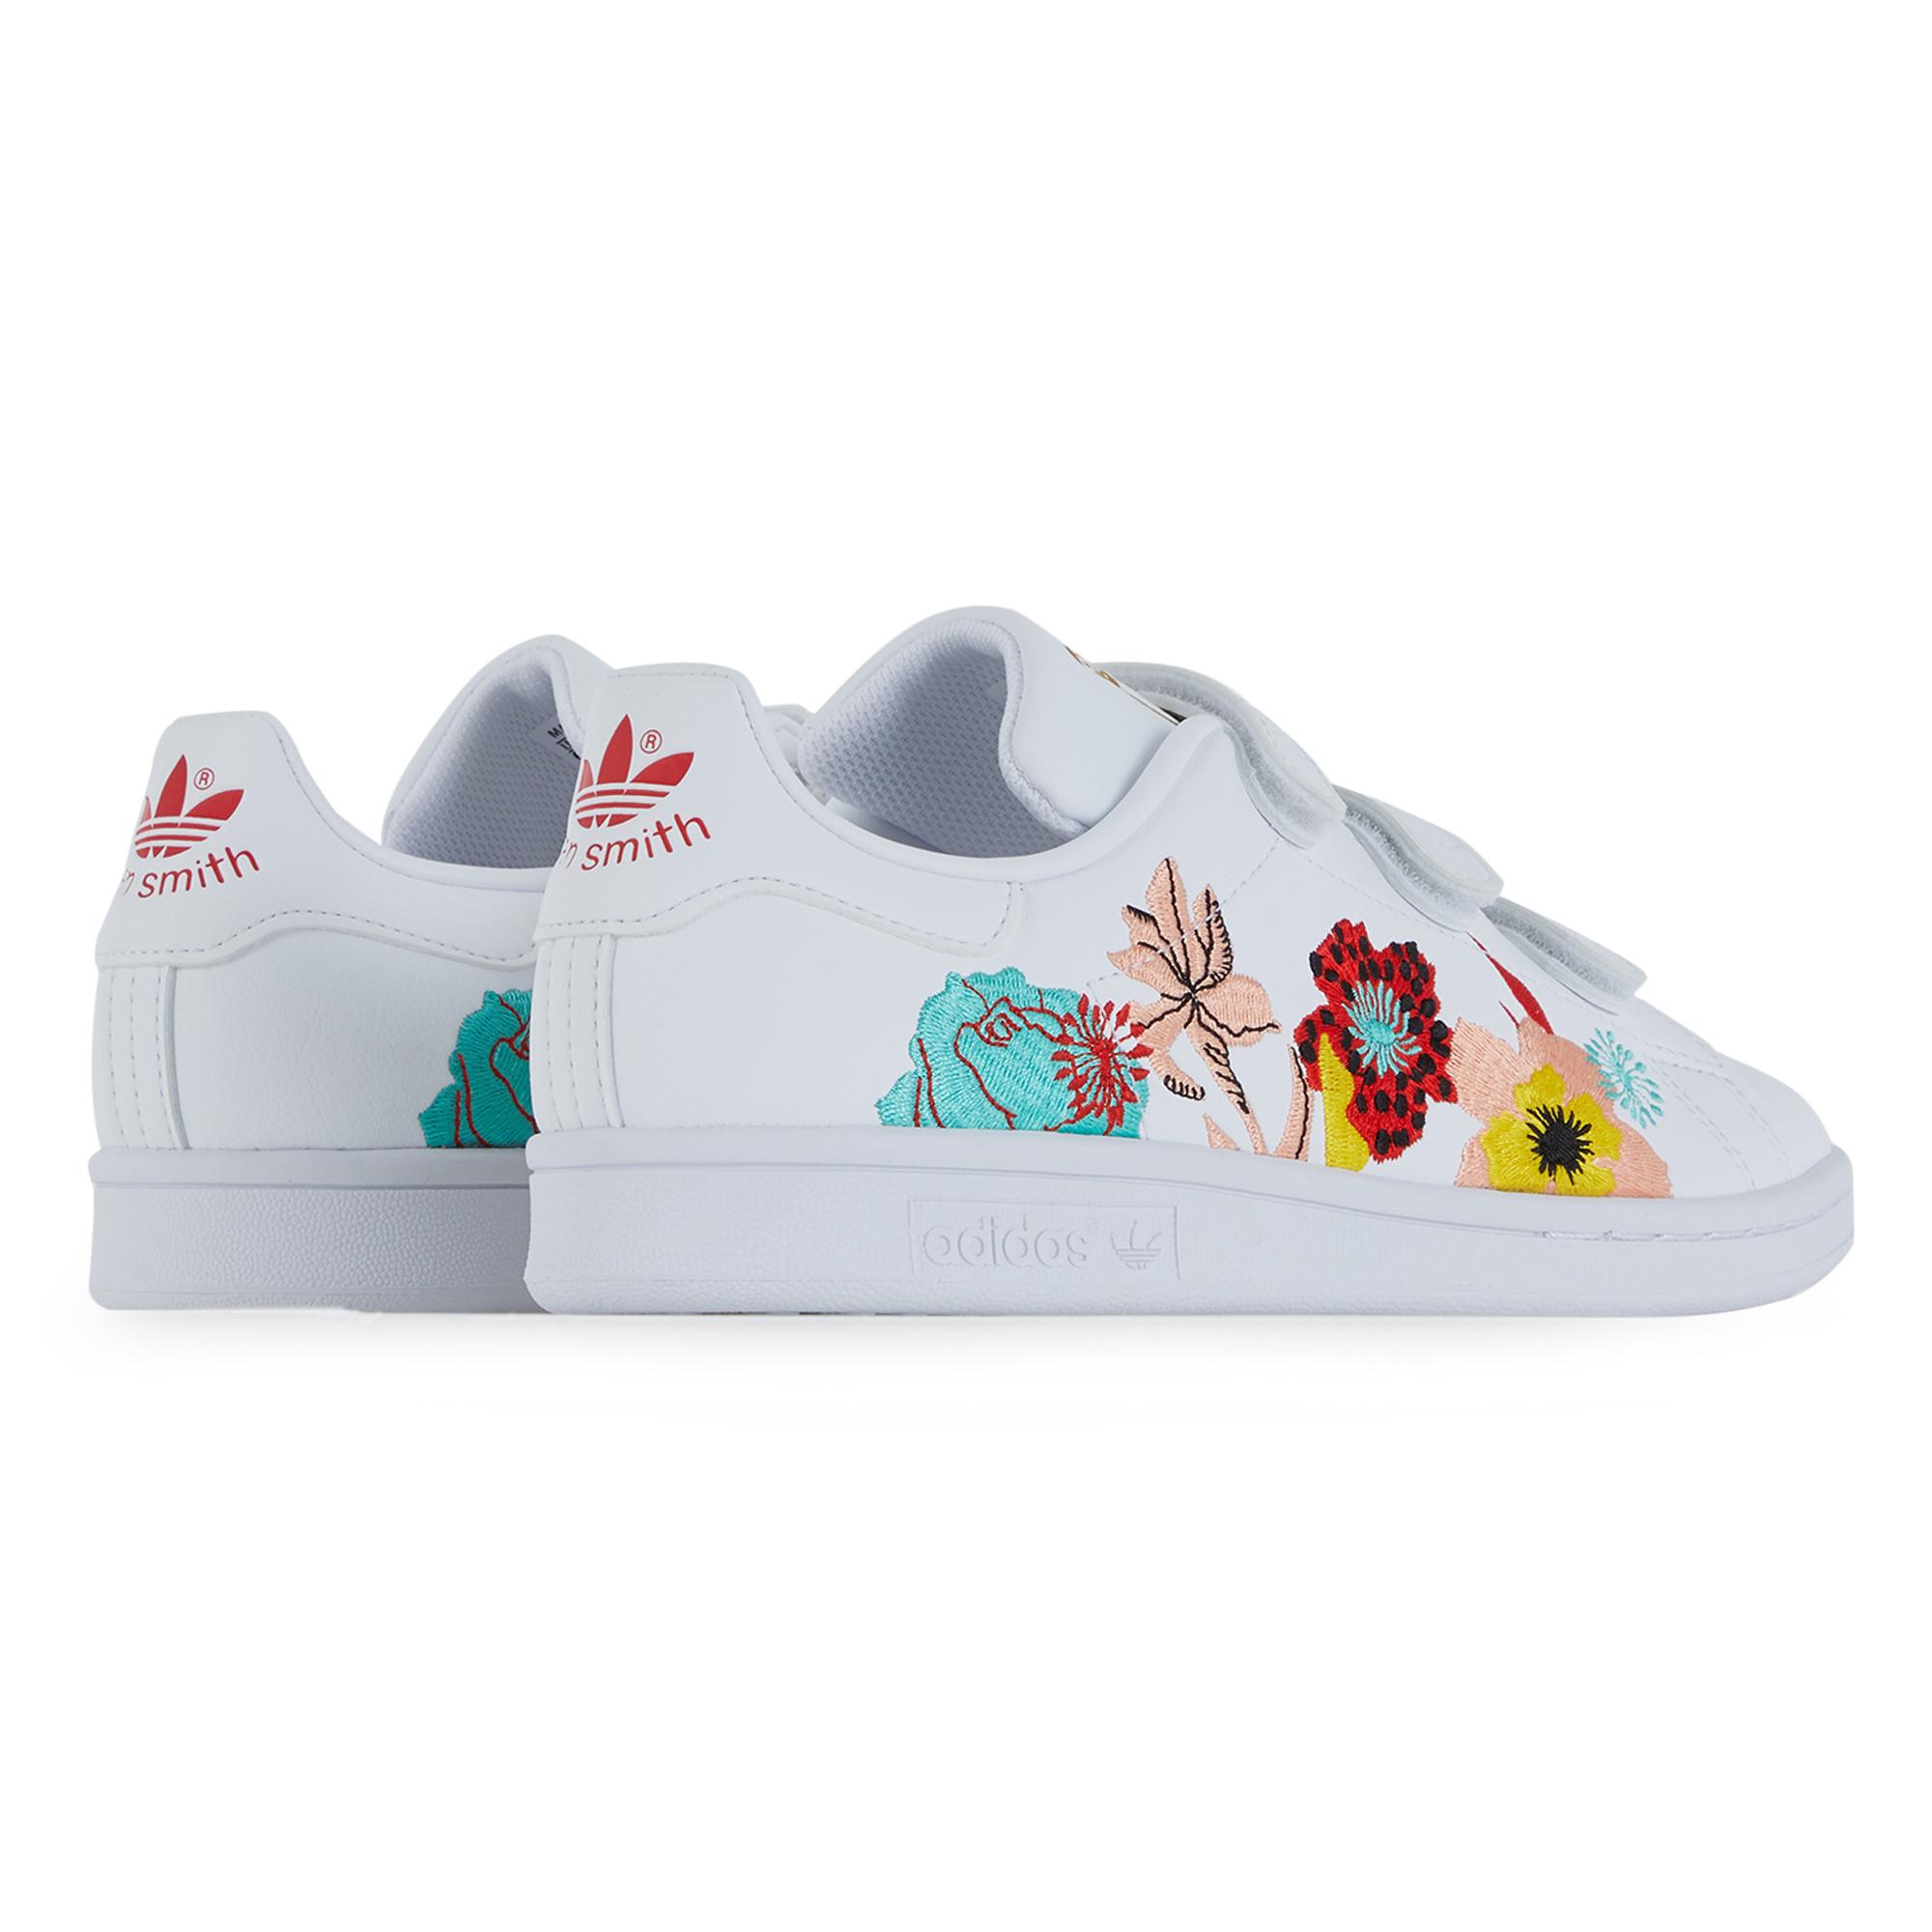 Stan Smith Cf Floral Outlet, SAVE 59% - lutheranems.com